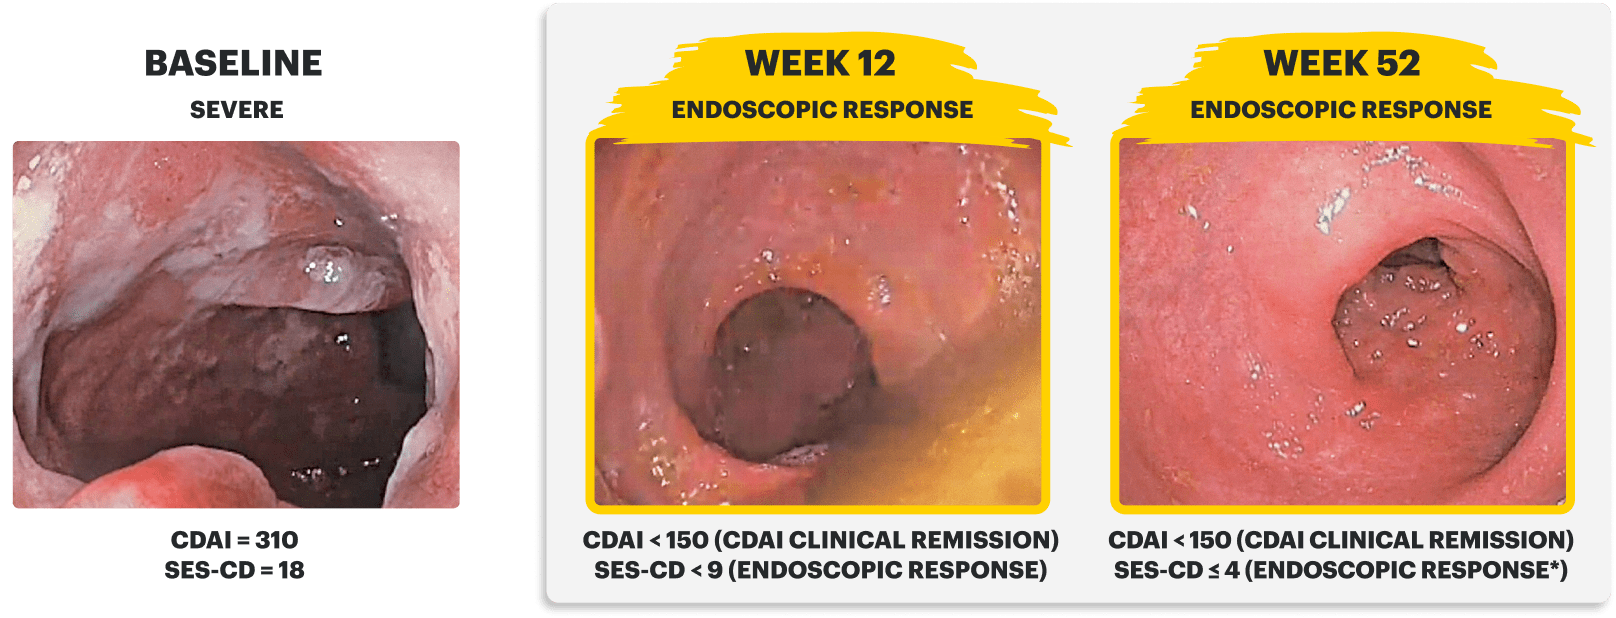 Endoscopy images of a clinical trial patient at baseline (Week 0), Induction (Week 12), and Maintenance (Week 52)